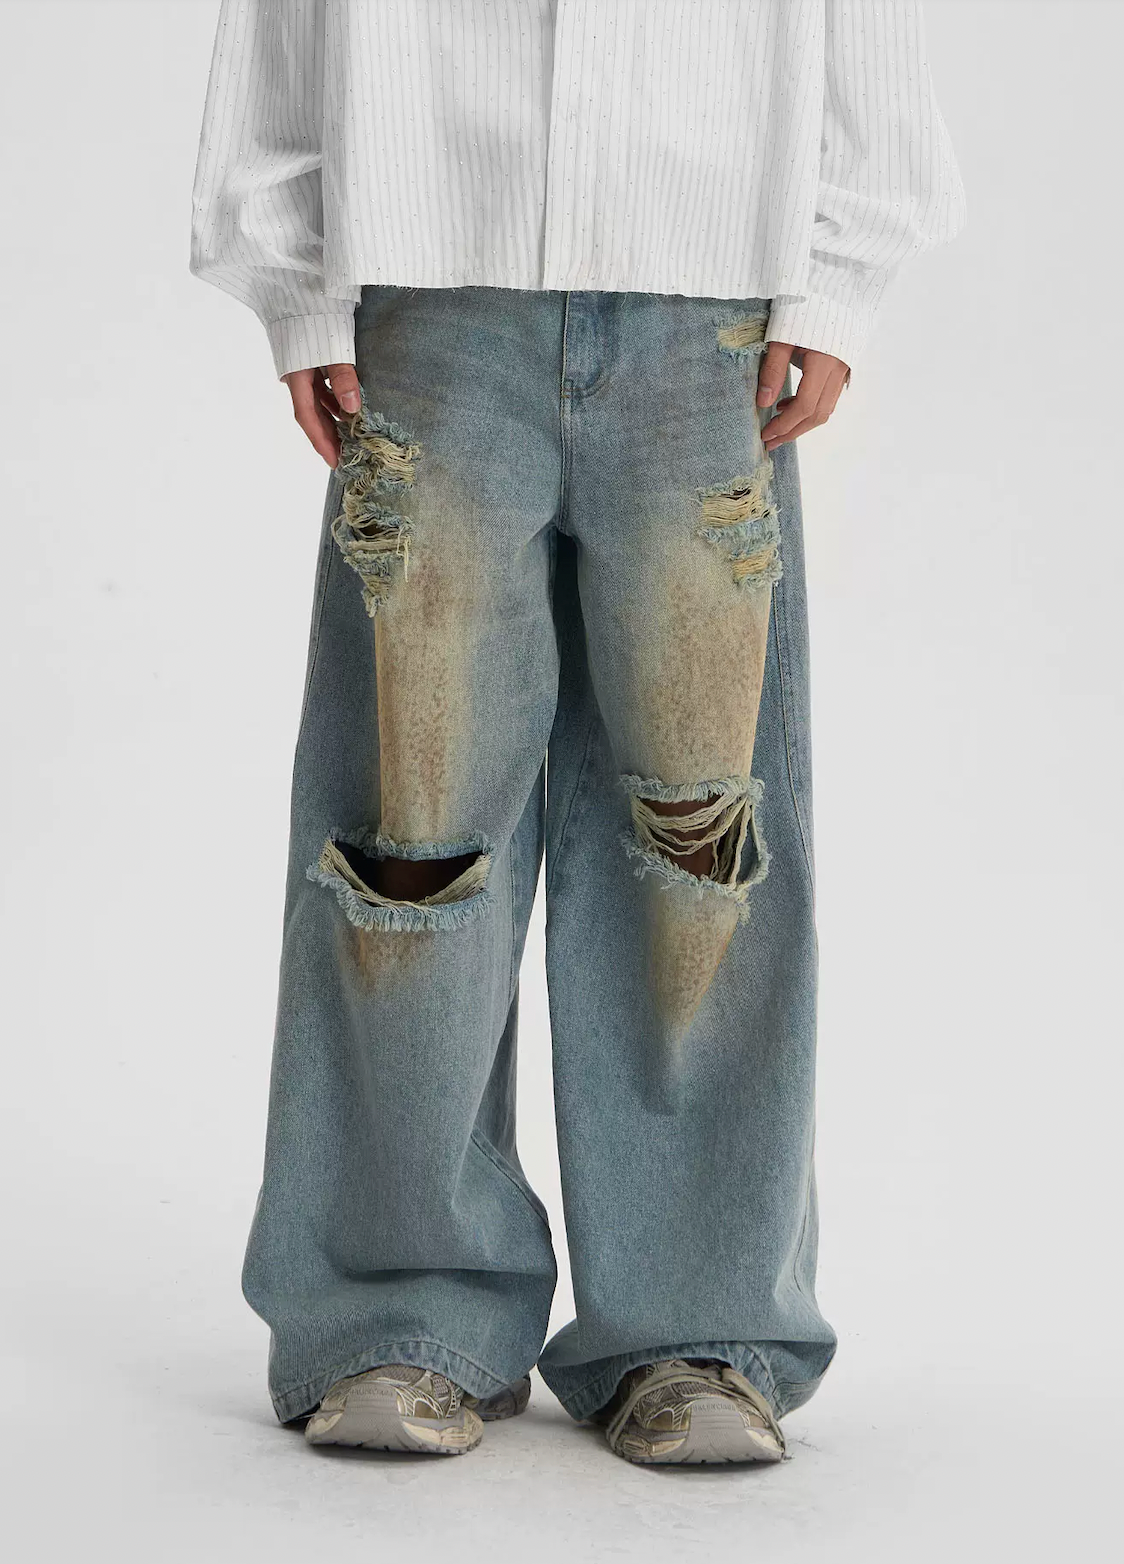 JHYQ Washed Distressed Ripped Baggy Jeans